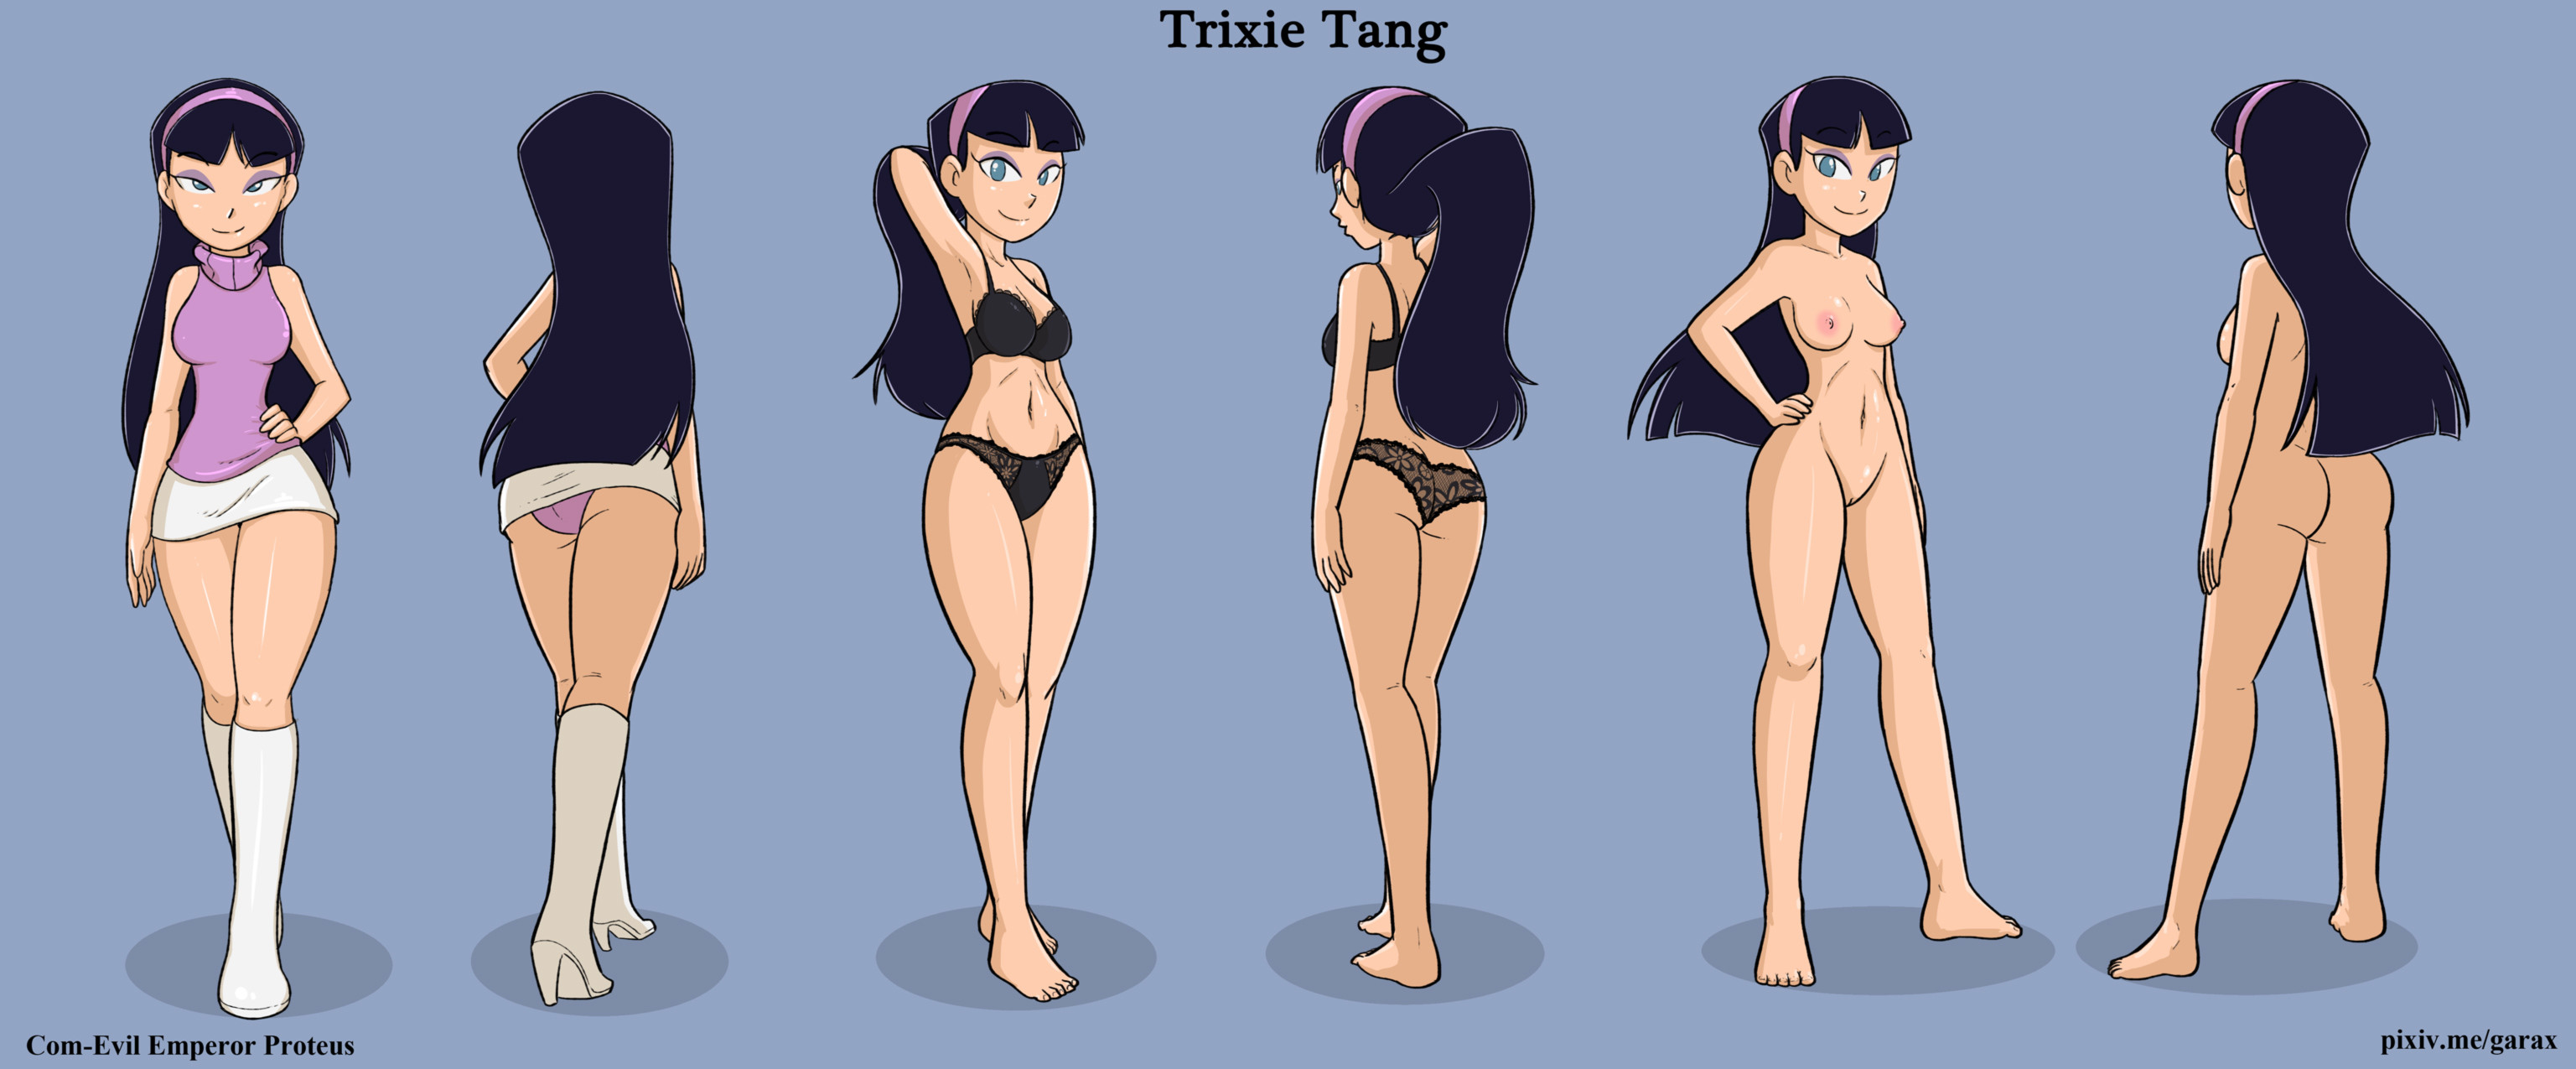 Porn trixie tang The Fairly